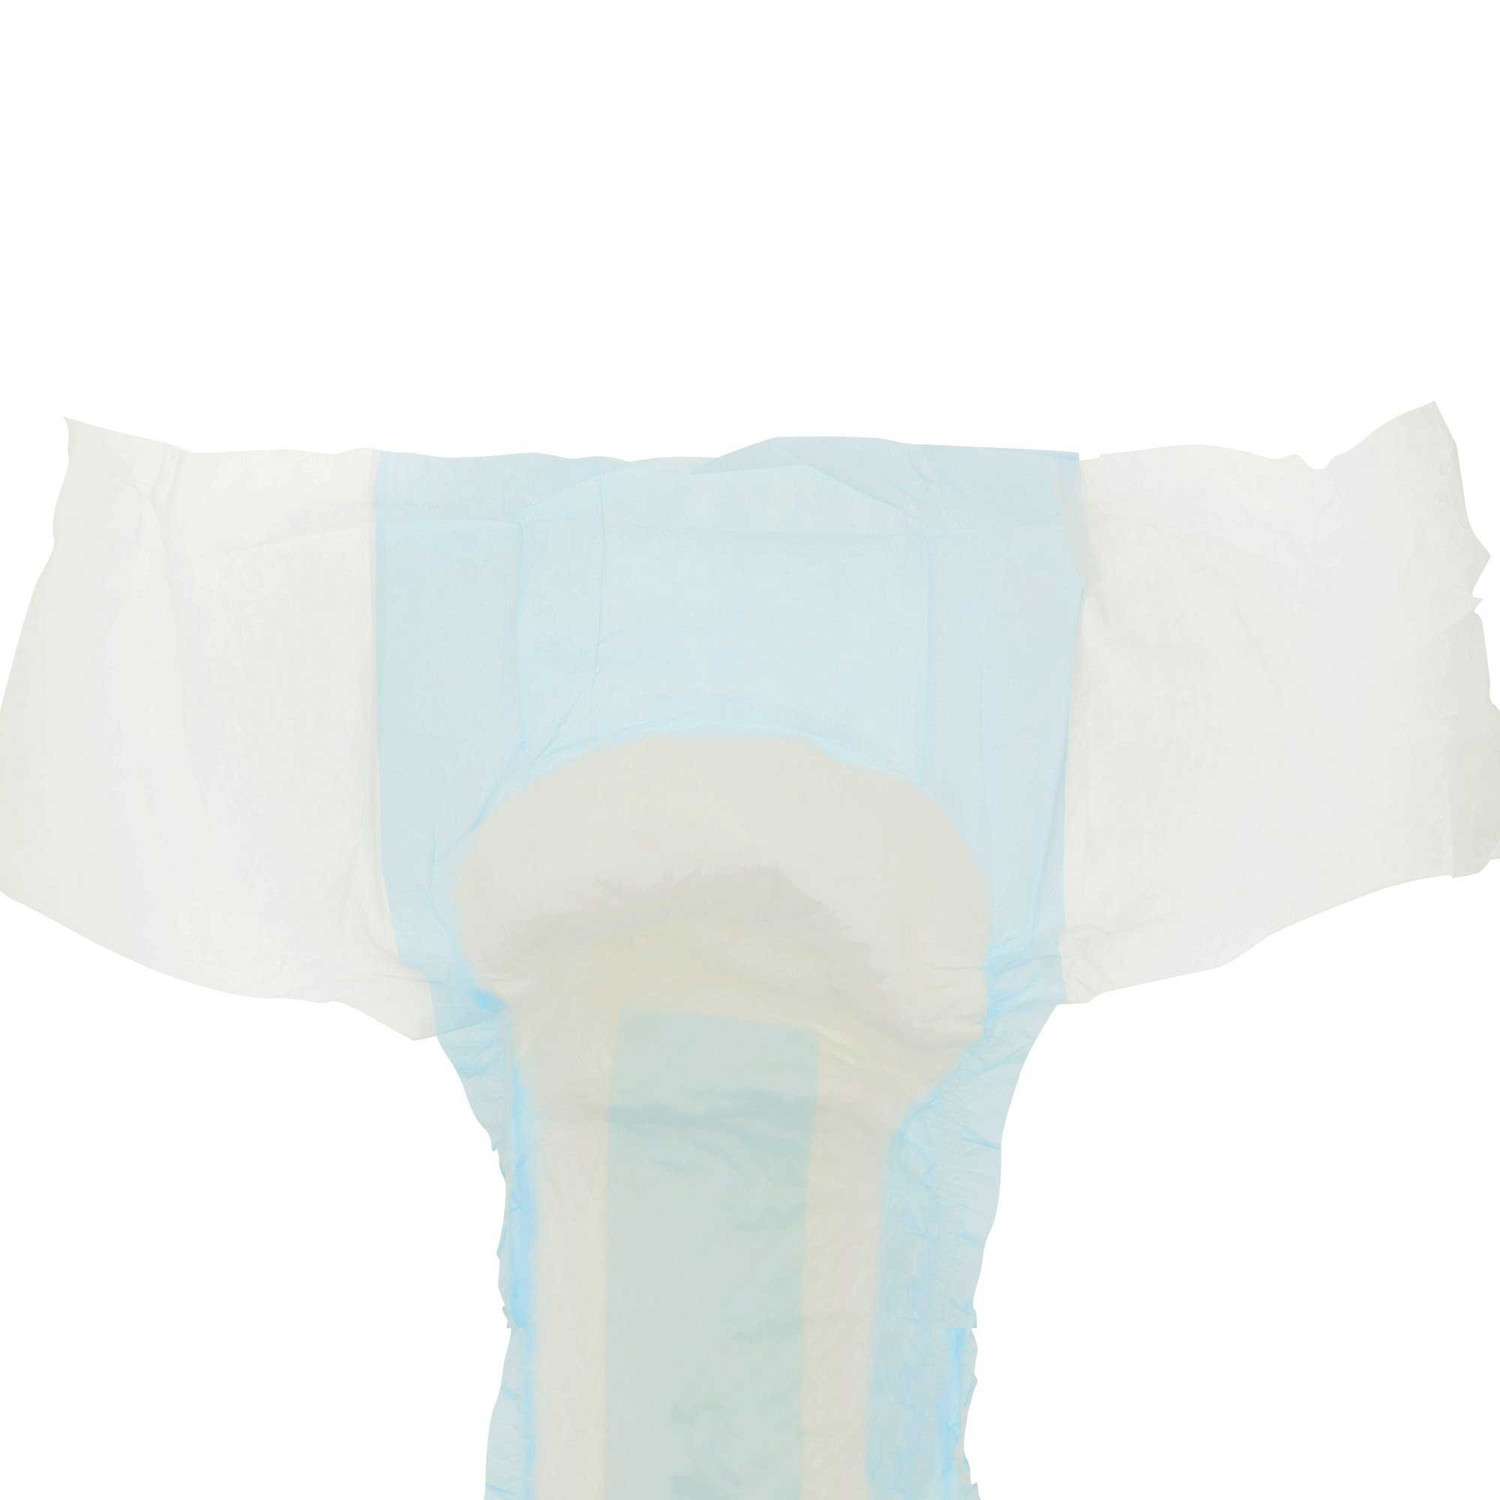 Simplicity Unisex Adult Incontinence Briefs, Moderate Absorbency, Large,  Blue, 45 to 58 Inch Waist/Hip